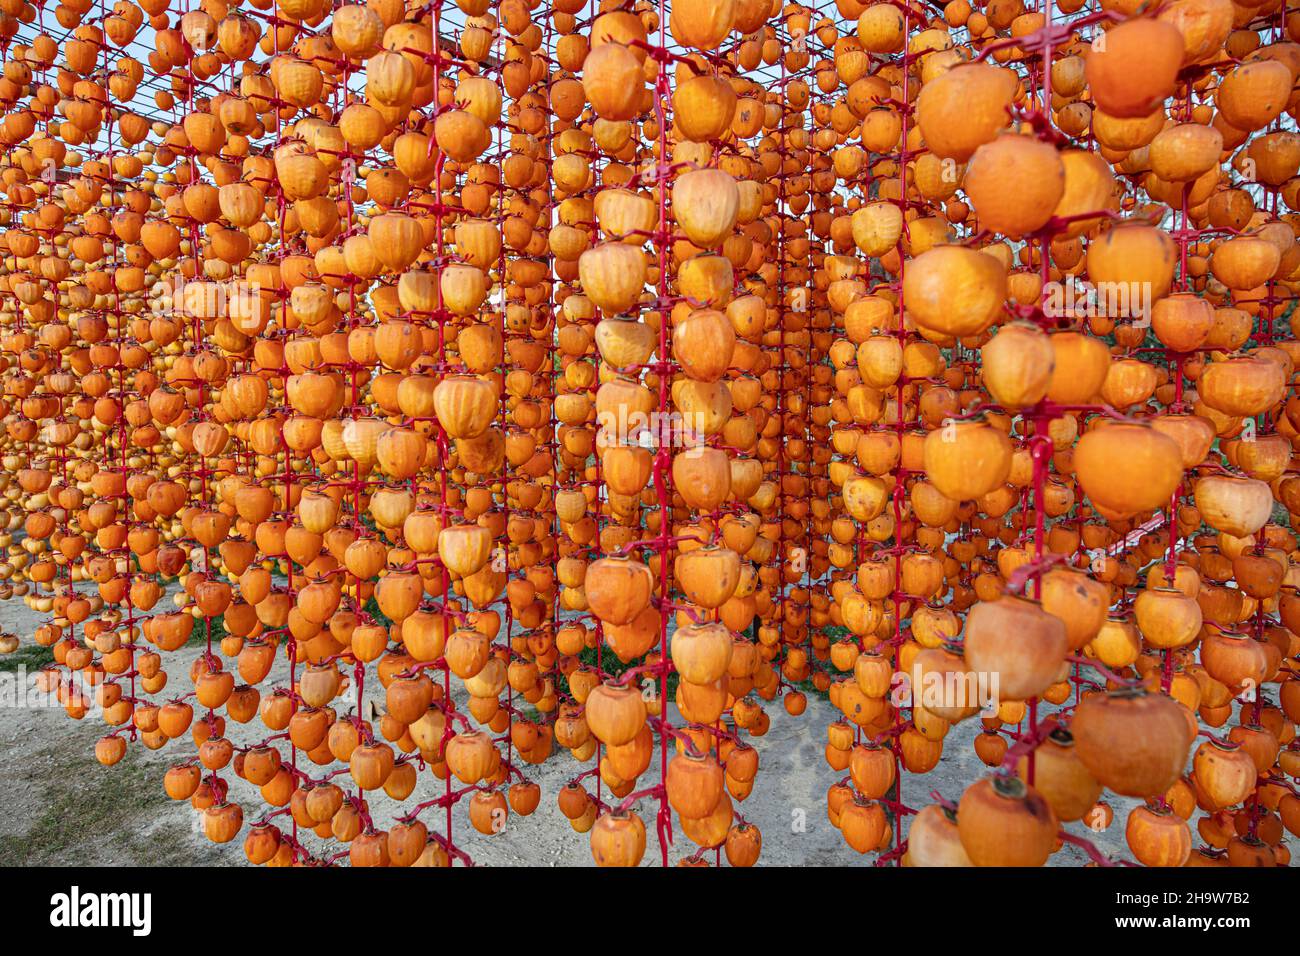 Persimmons or Kaki fruits peeled and hung on a string to dry. Diospyros kaki fruit or Persimmons are exposed to the sun and natural wind like the Deni Stock Photo